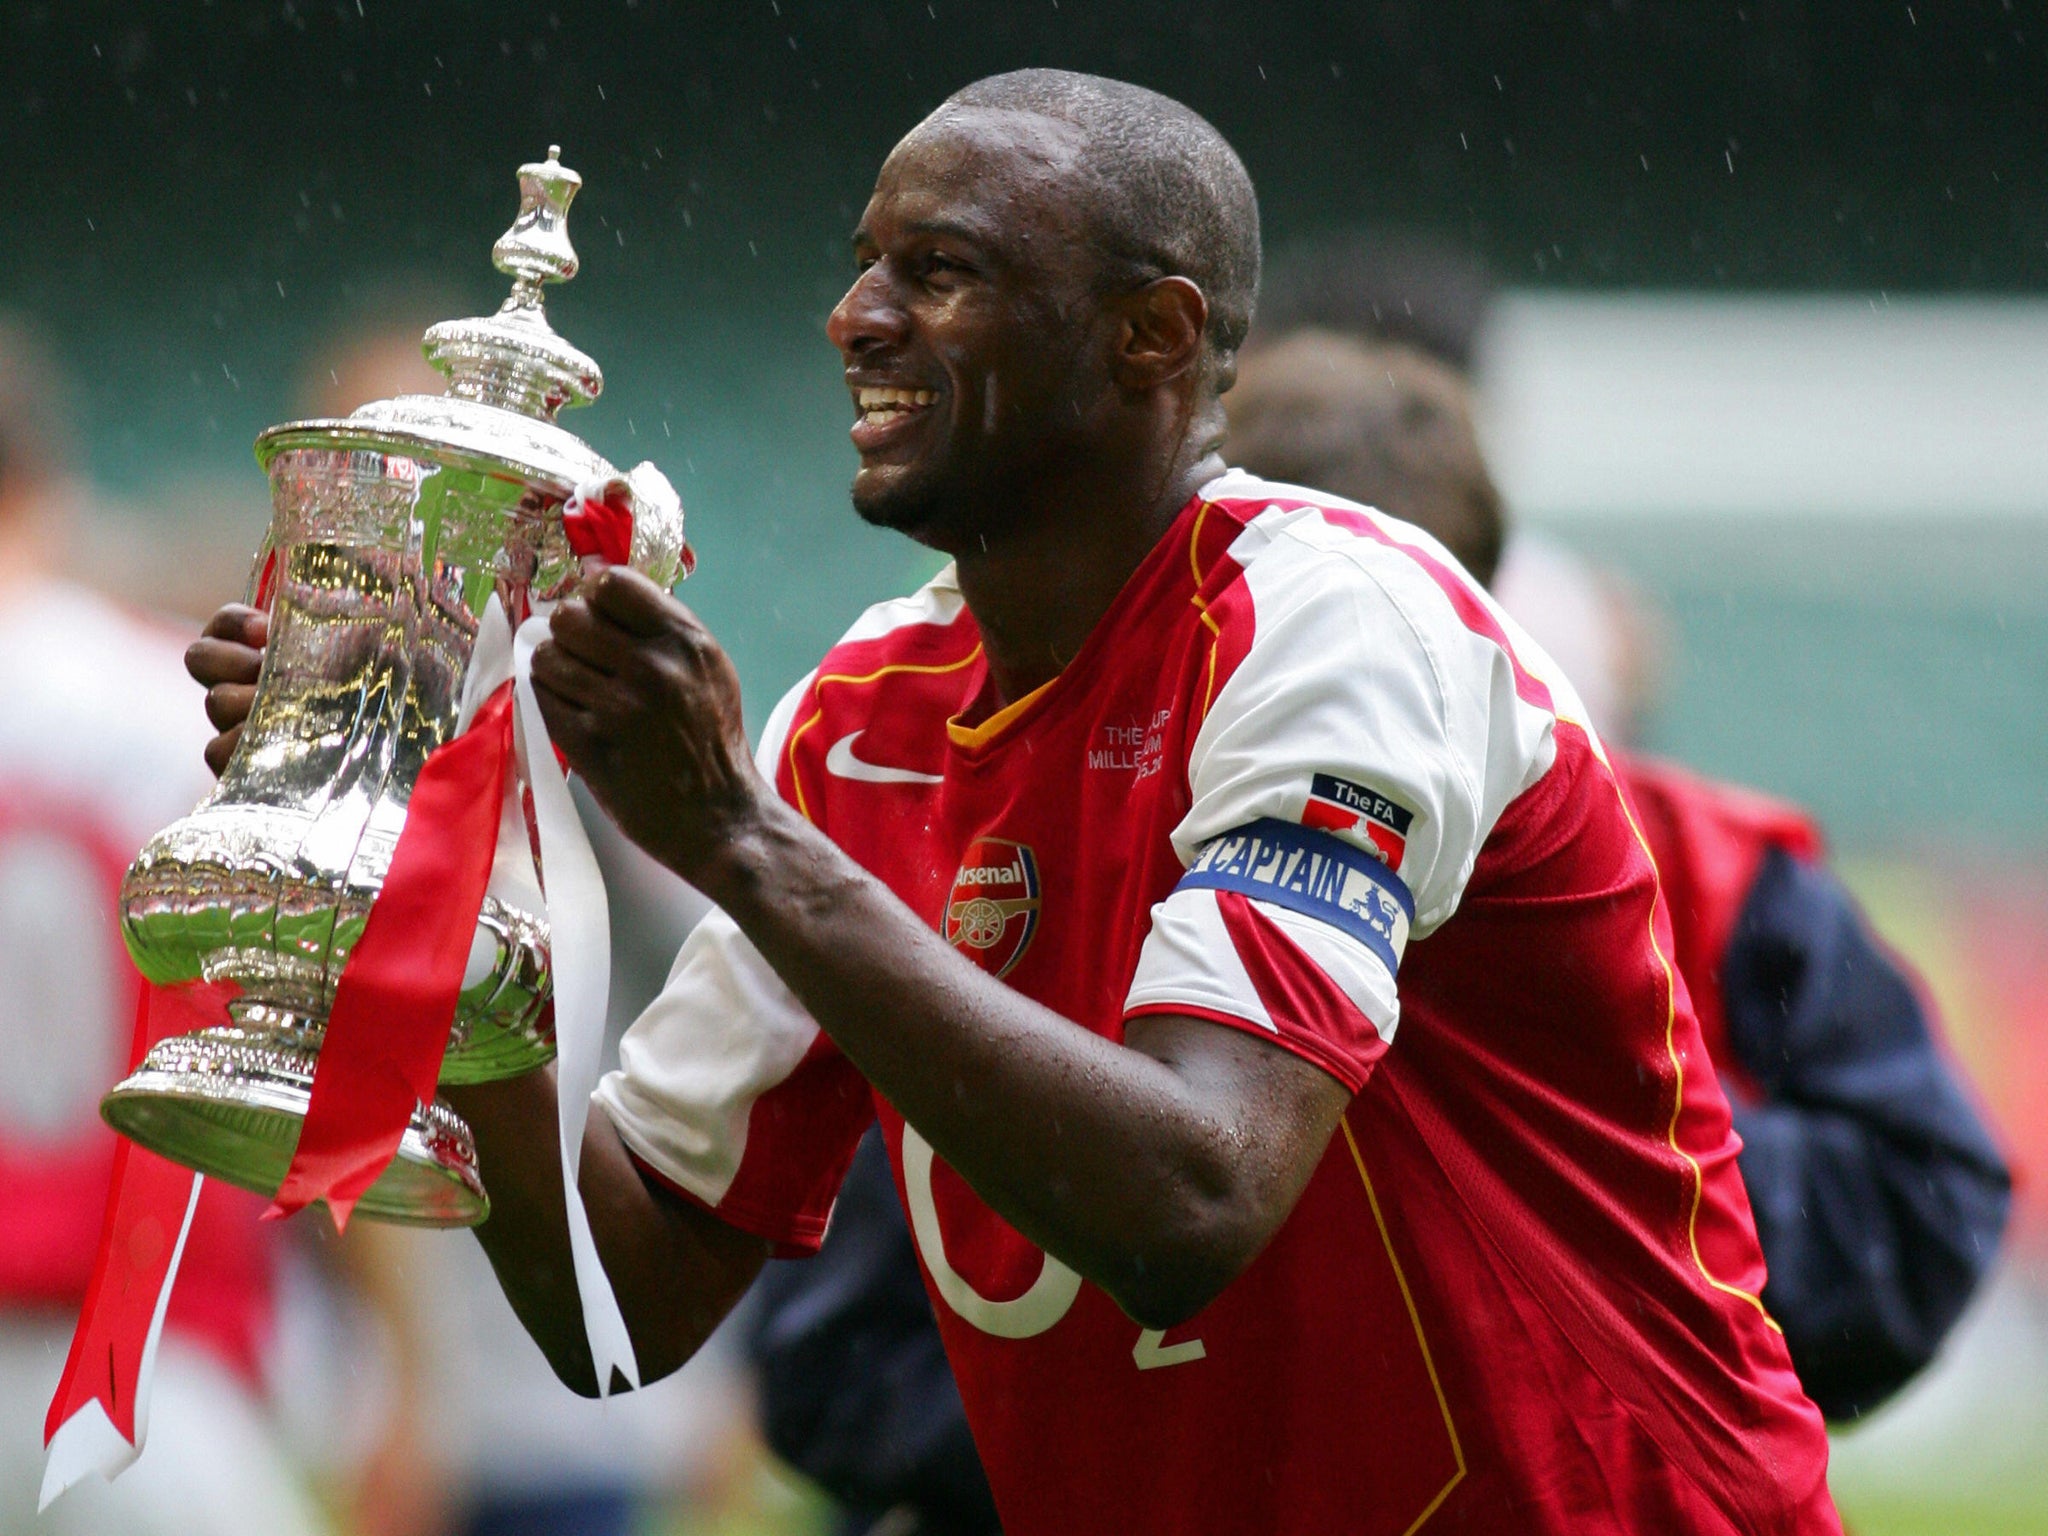 Patrick Vieira never won the player of the year award